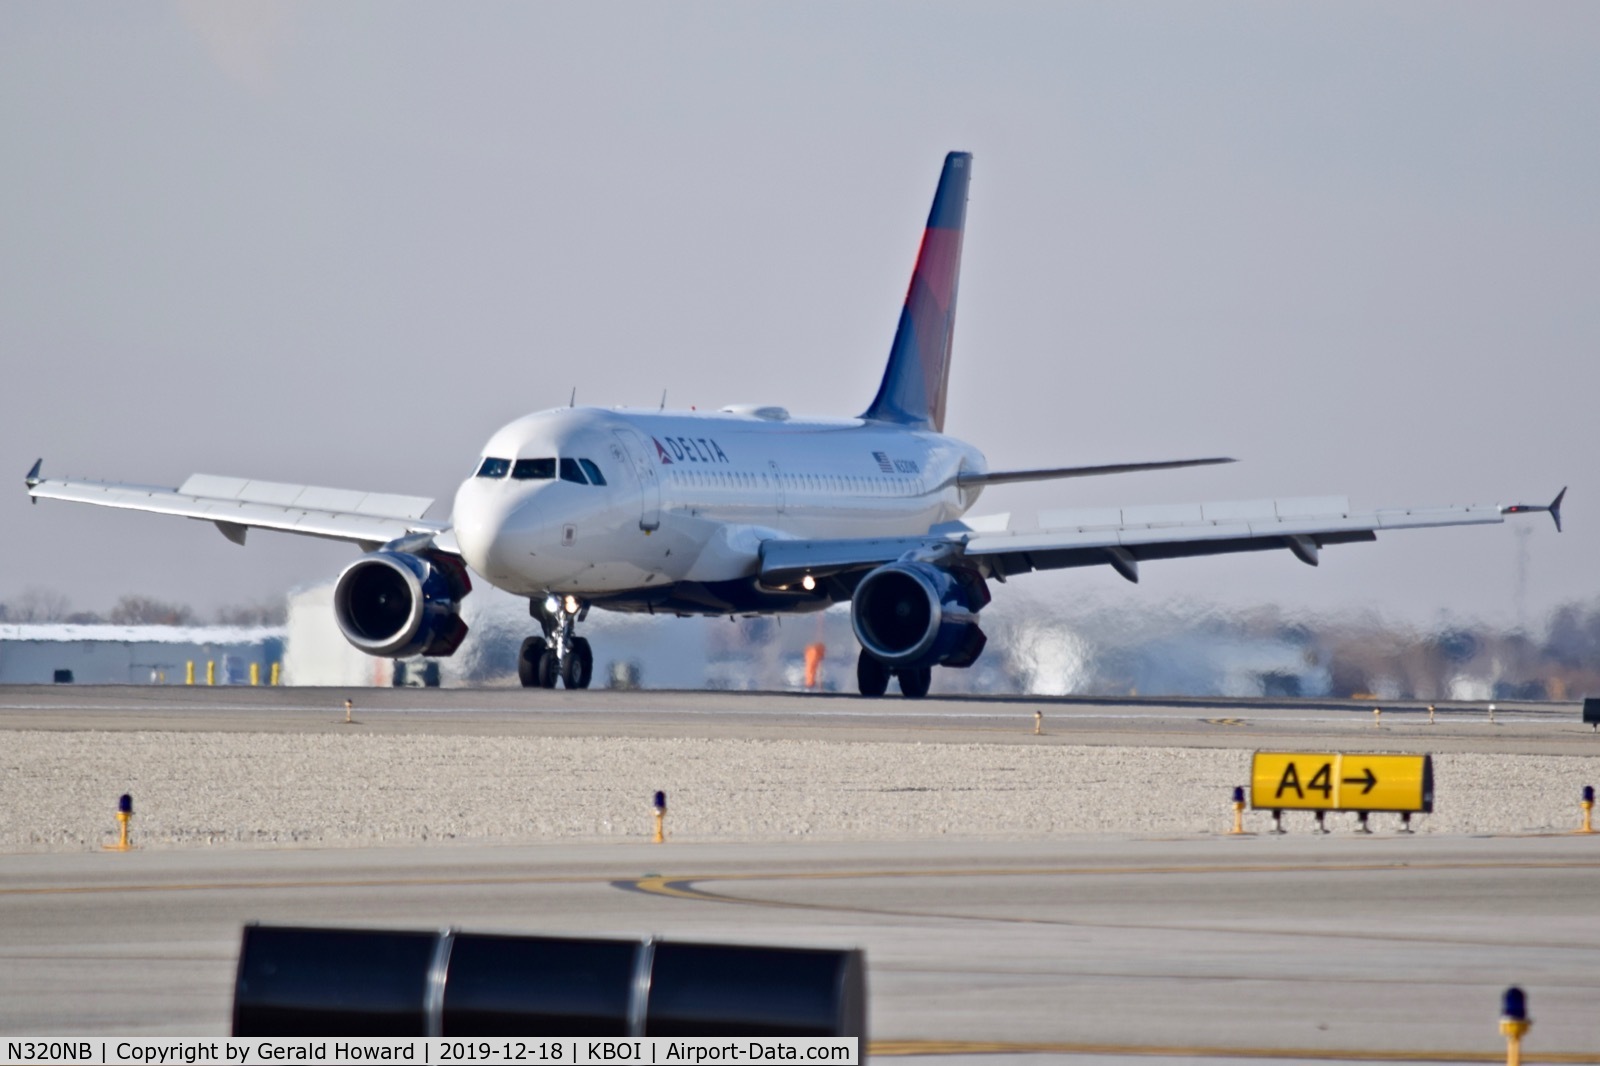 N320NB, 2000 Airbus A319-114 C/N 1392, Landing roll out on 10L.